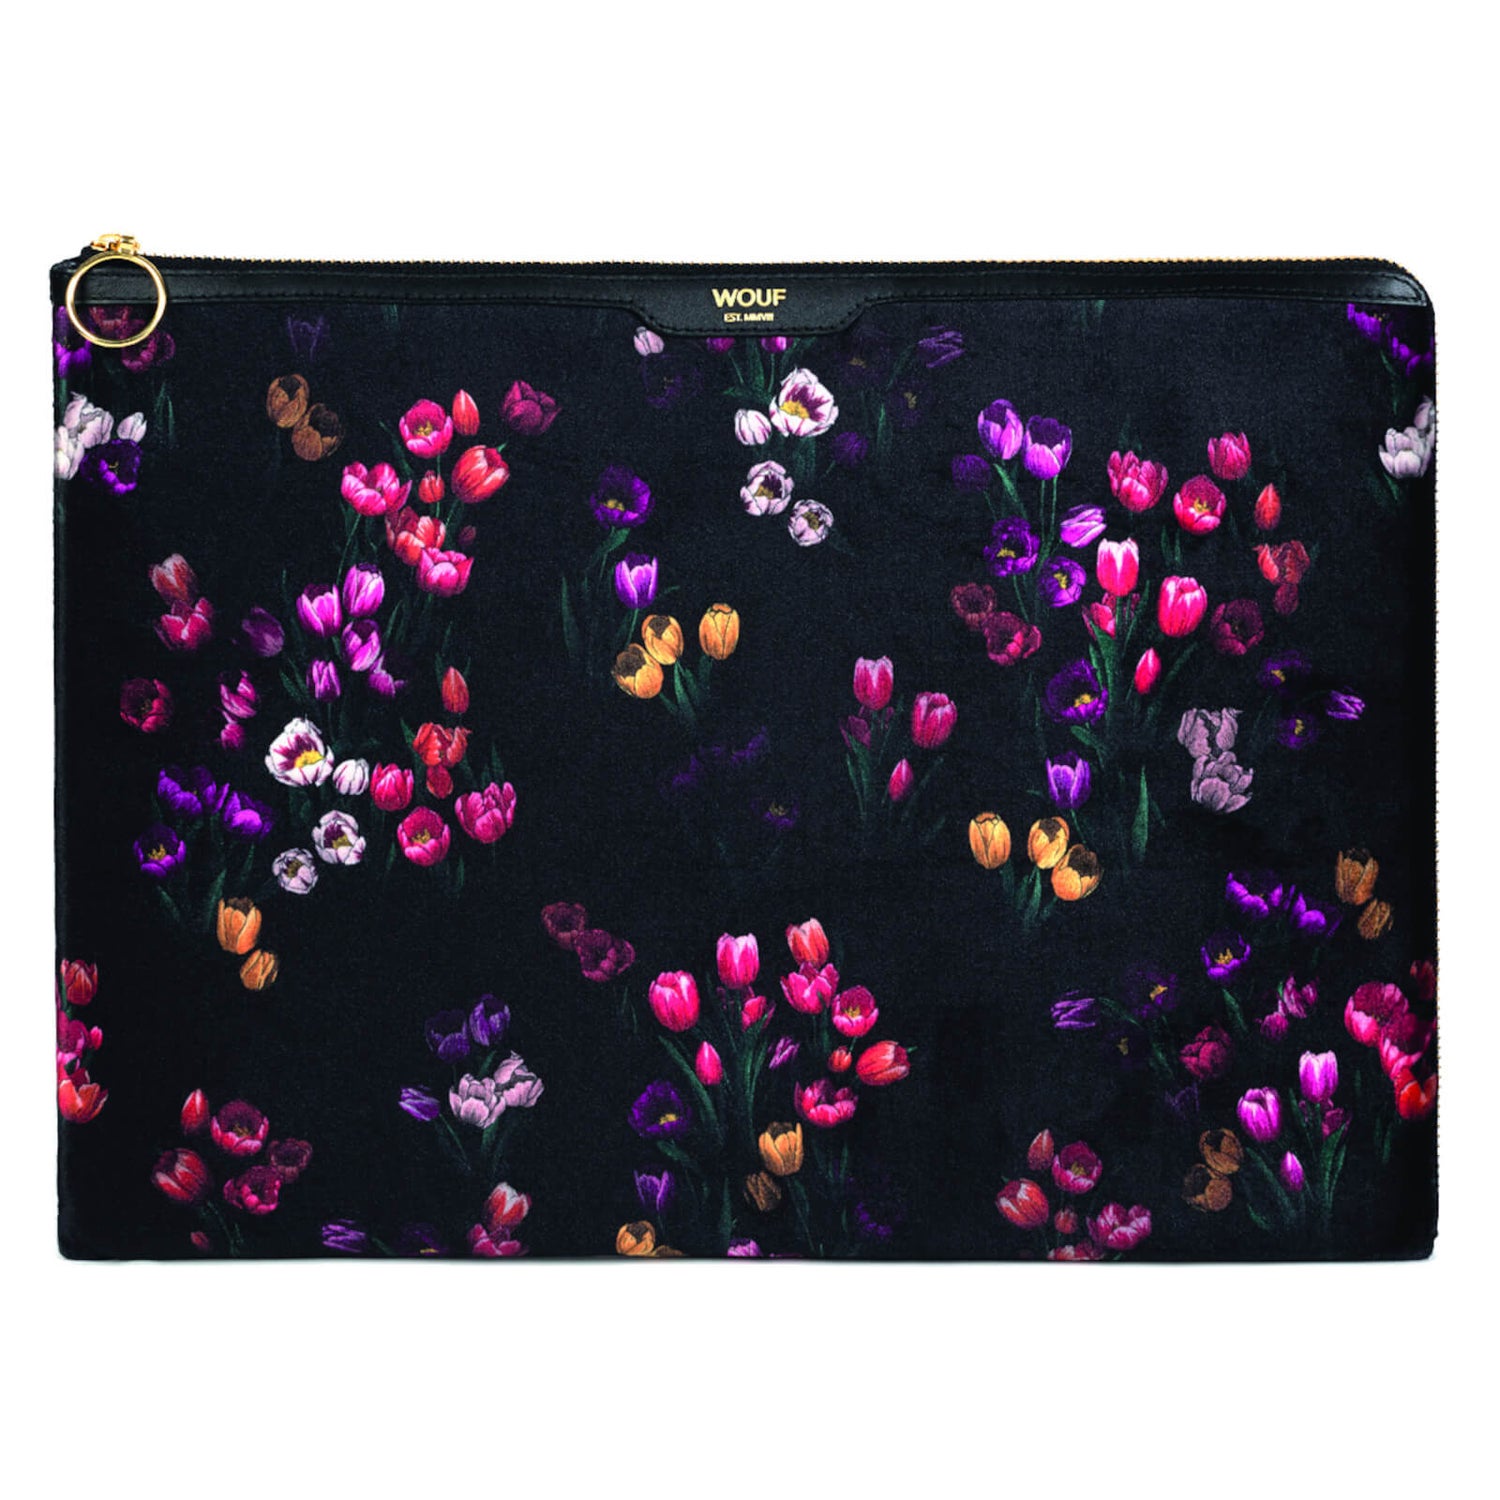 Wouf 13" Laptop Case - Tulips